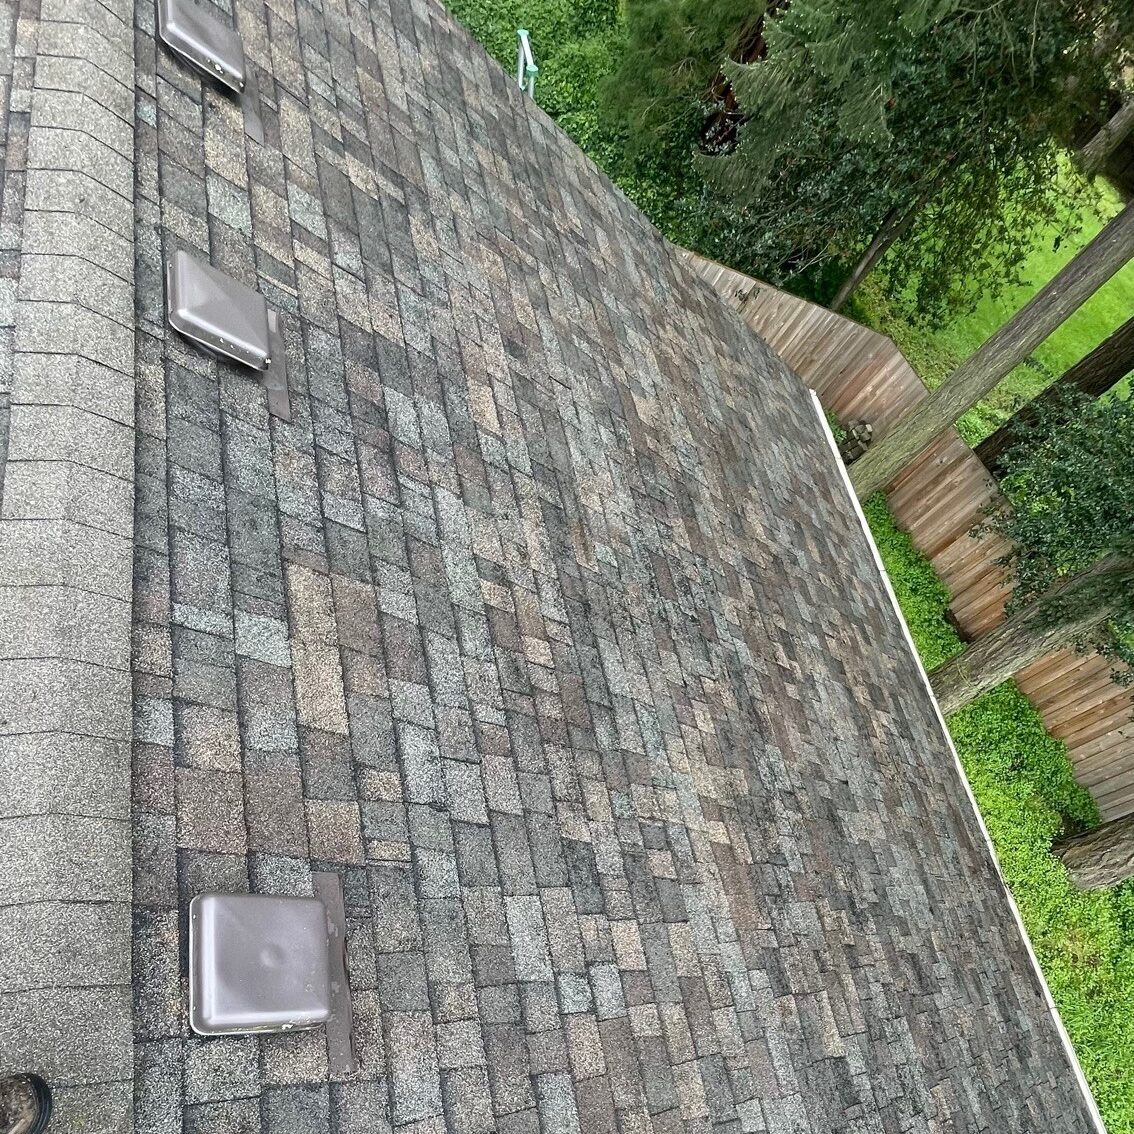 Aerial view of a shingled roof with vent covers and a backdrop of trees.